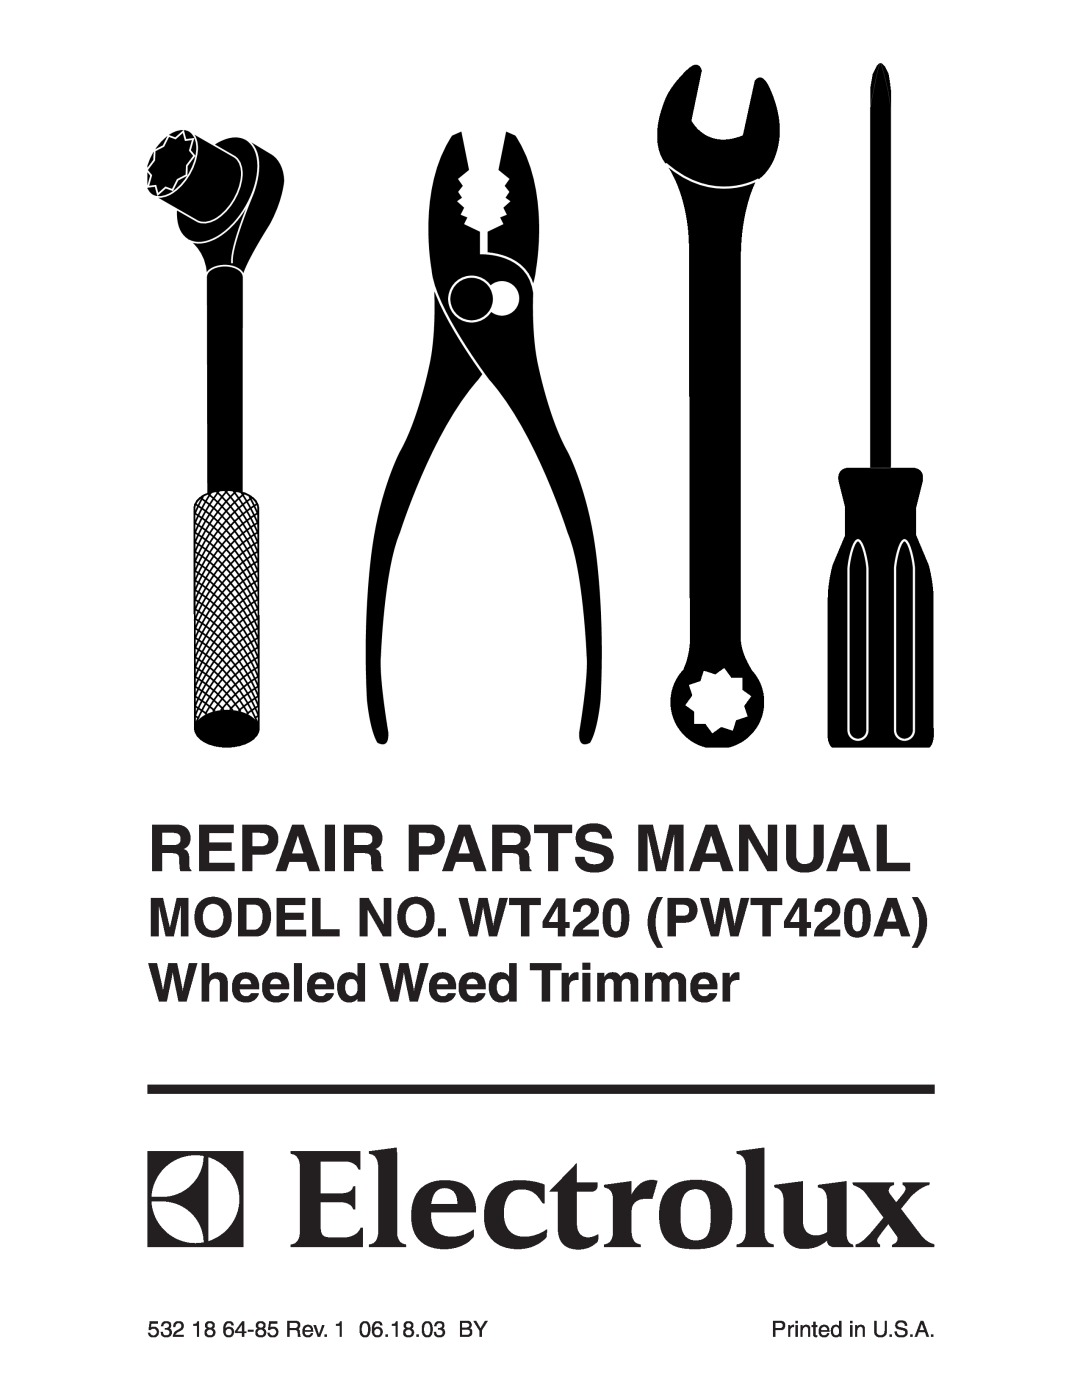 Electrolux manual Repair Parts Manual, MODEL NO. WT420 PWT420A Wheeled Weed Trimmer, 532 18 64-85 Rev. 1 06.18.03 BY 